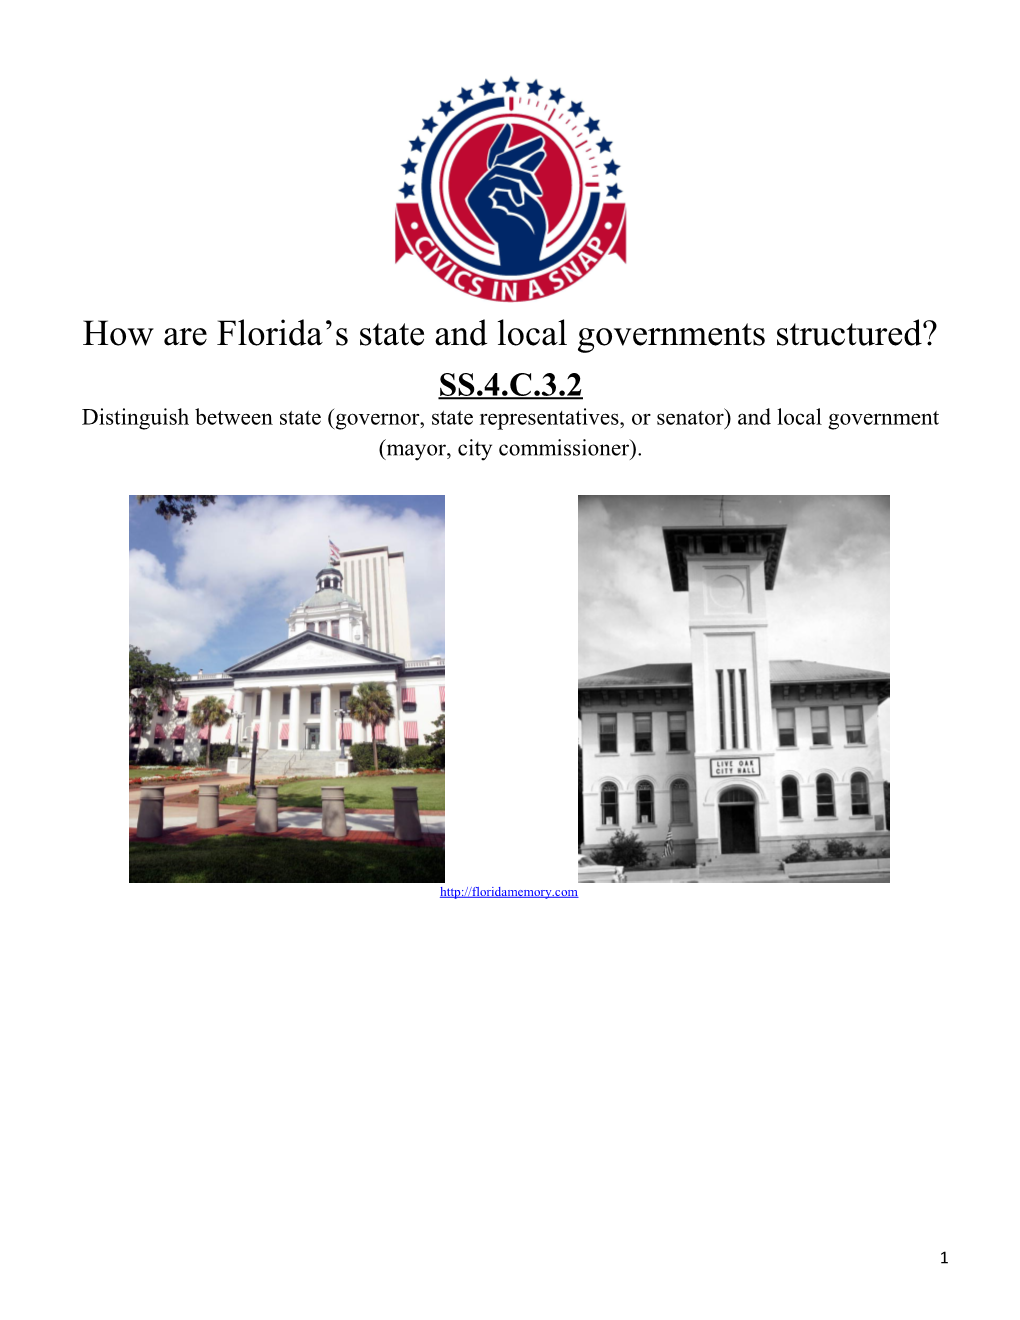 How Are Florida S State and Local Governments Structured?